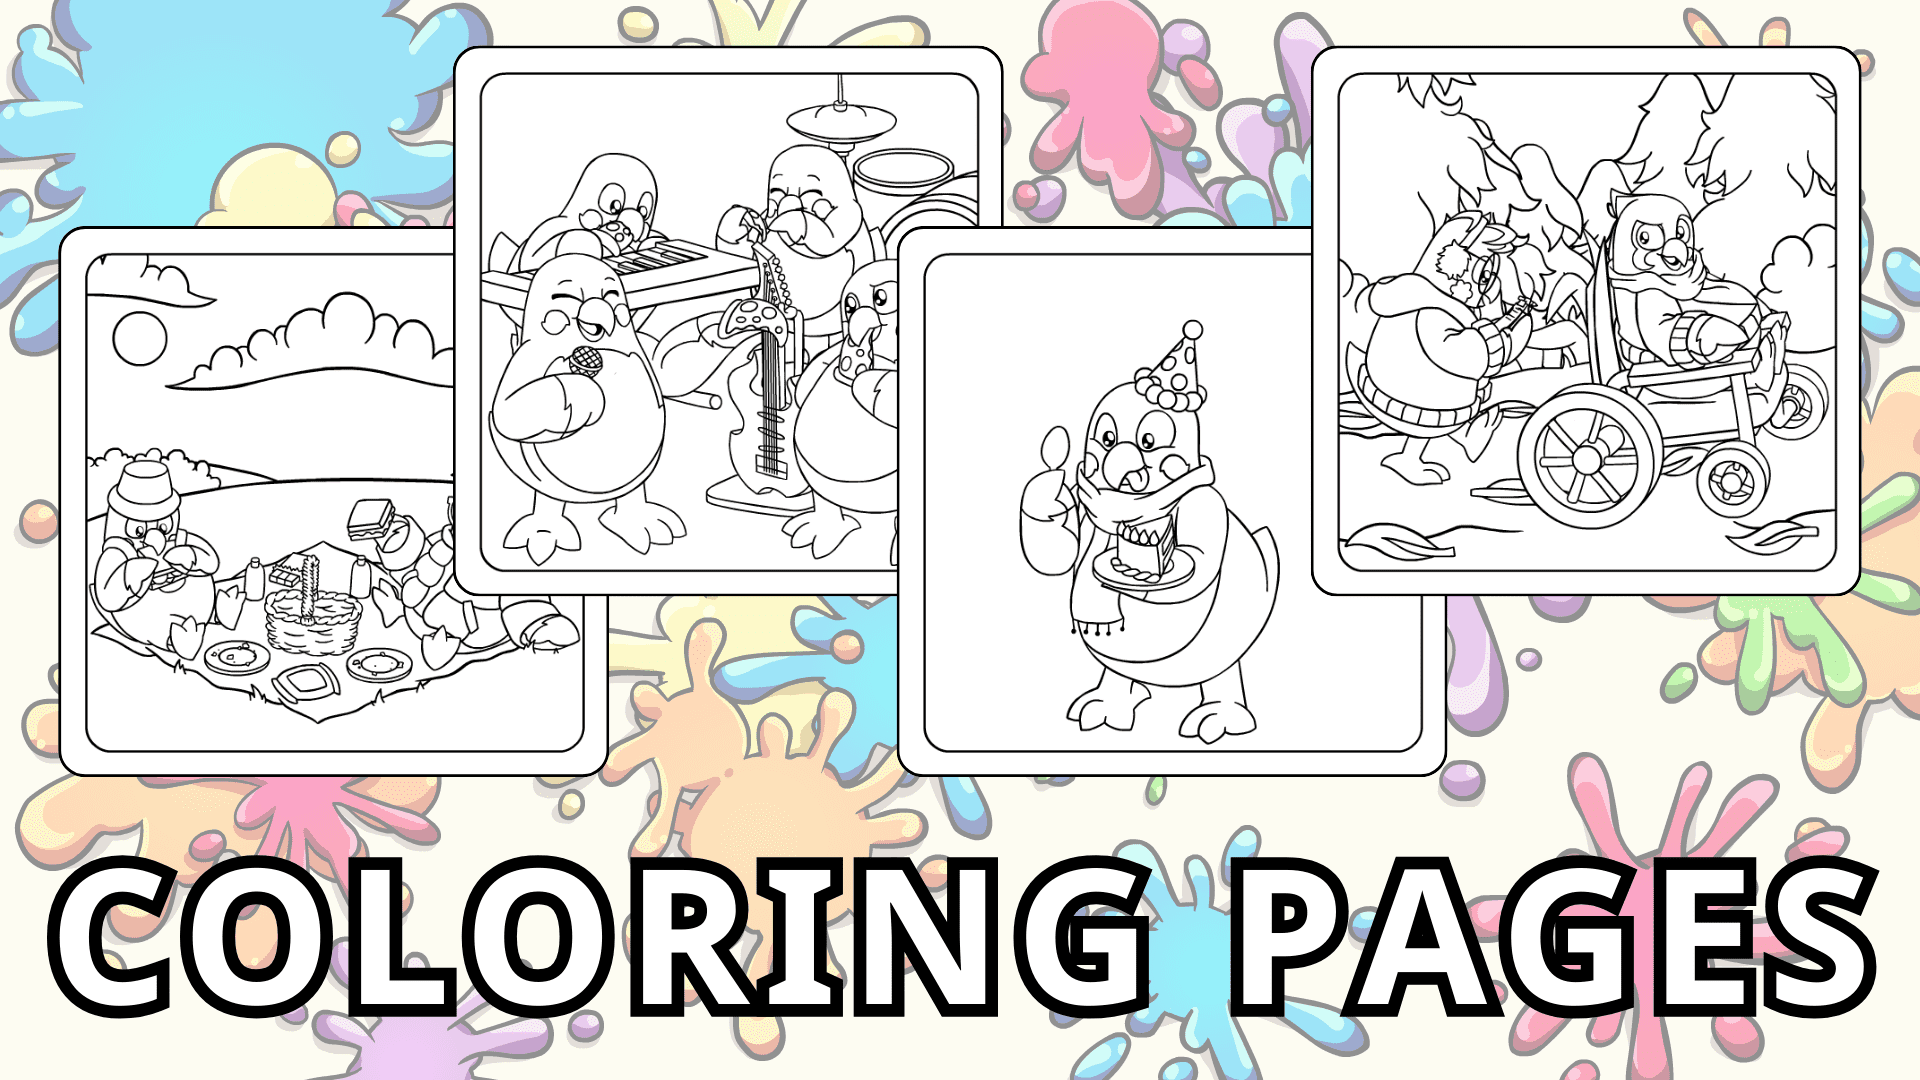 A group of four coloring pages for kids to print out with the text "Coloring Pages" against a colorful paint splatter background.